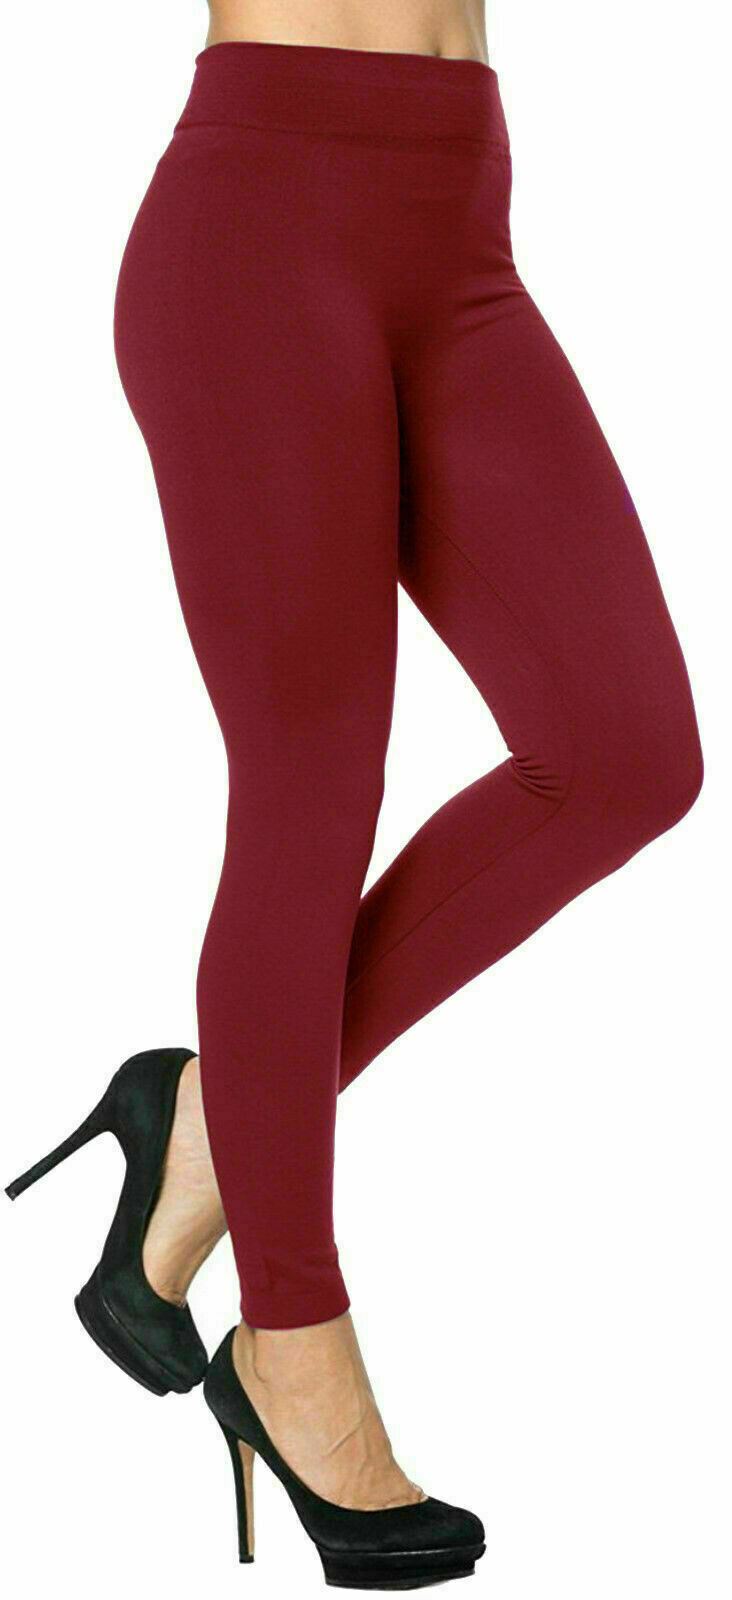 New Ladies Thick Winter Thermal Leggings Fleece Lined Warm High